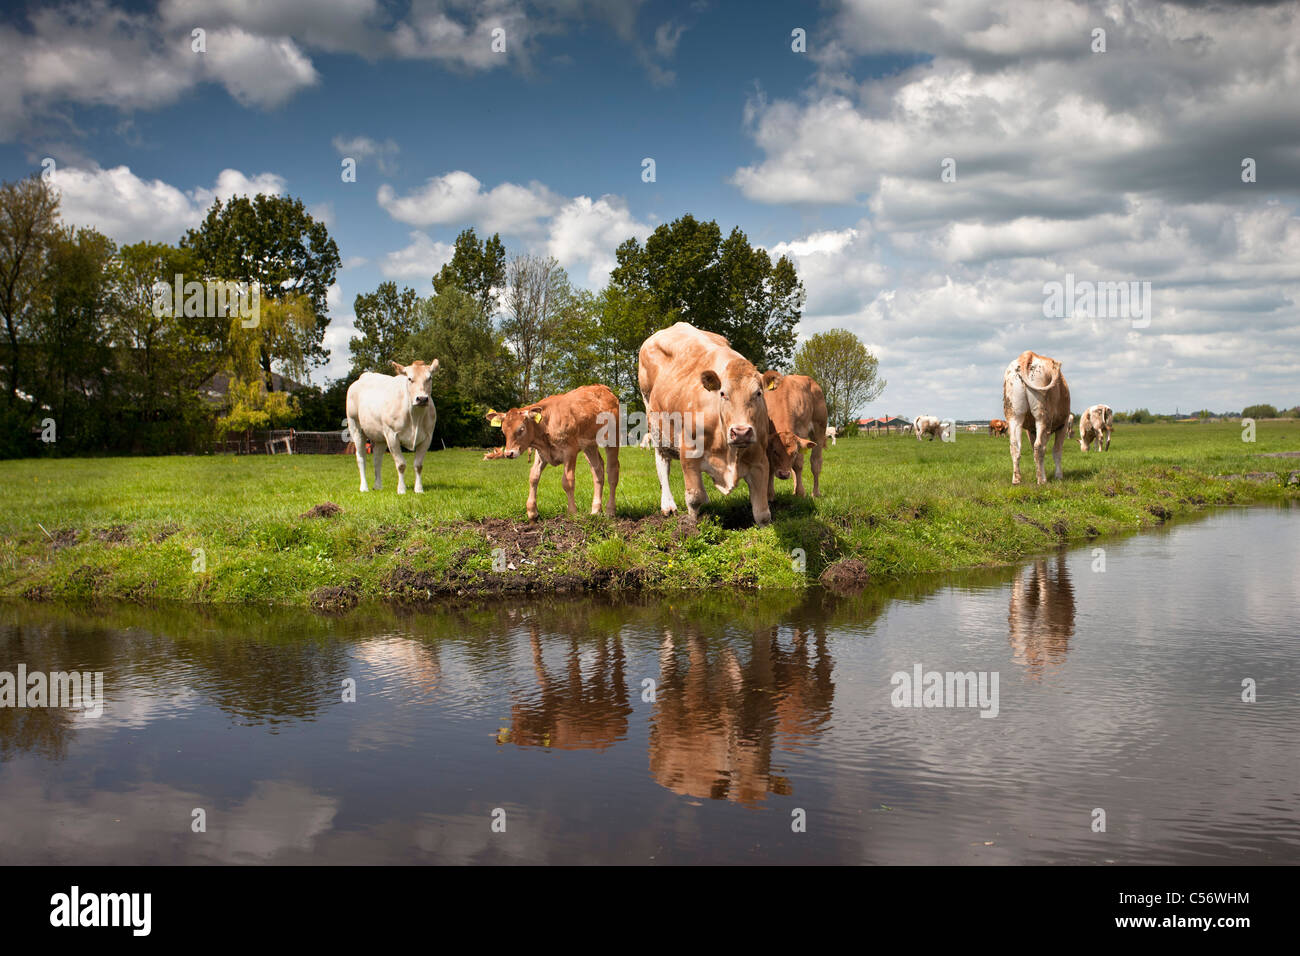 The Netherlands, Weesp, Cows and calves. Stock Photo